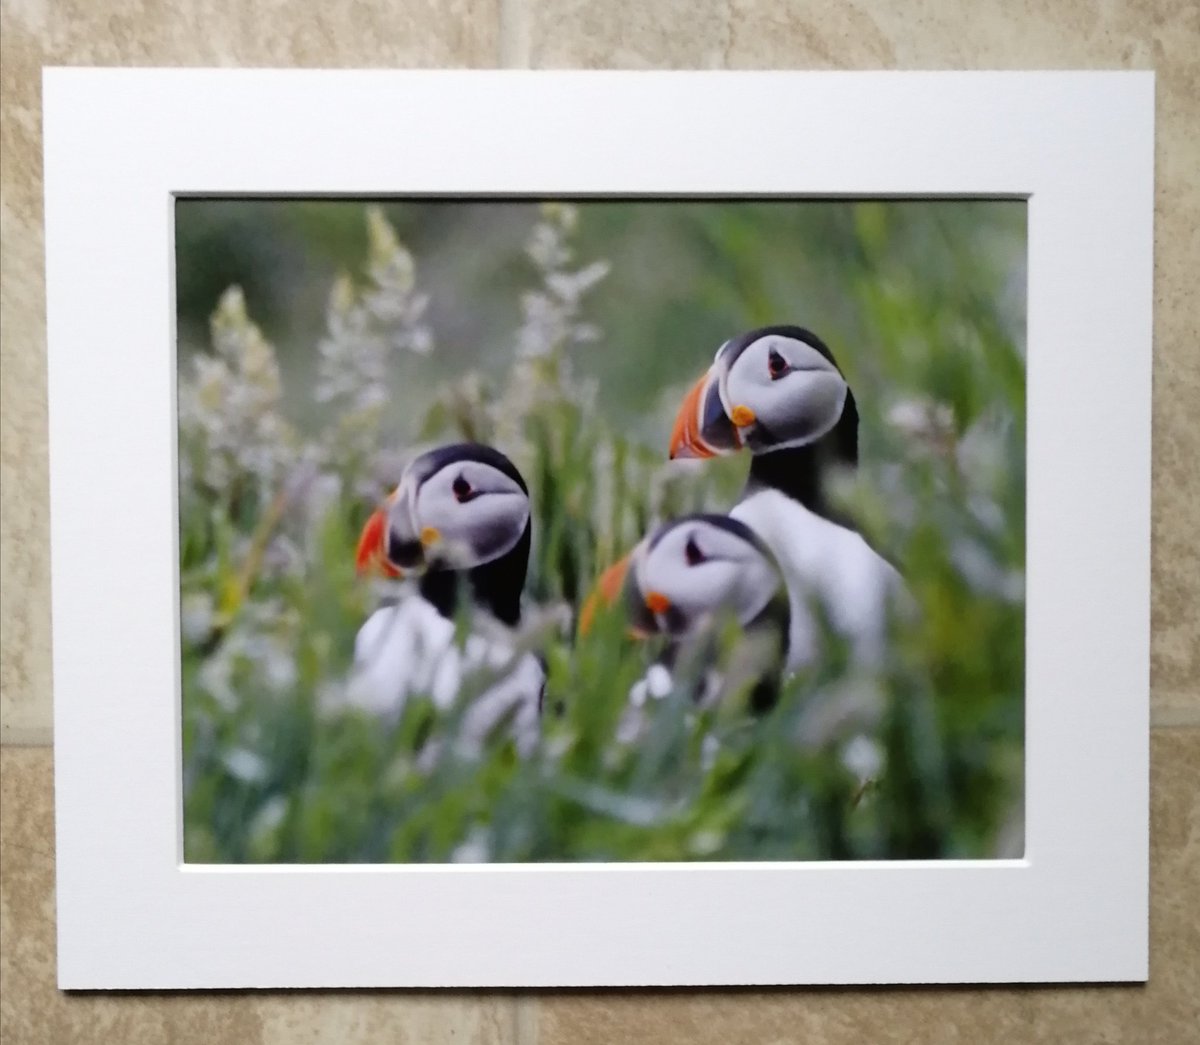 'Puffins in the grass' 10x8 mounted print.  You can buy it here; https://www.carlbovis.com/product-page/puffins-in-the-grass-10x8-mounted-print 